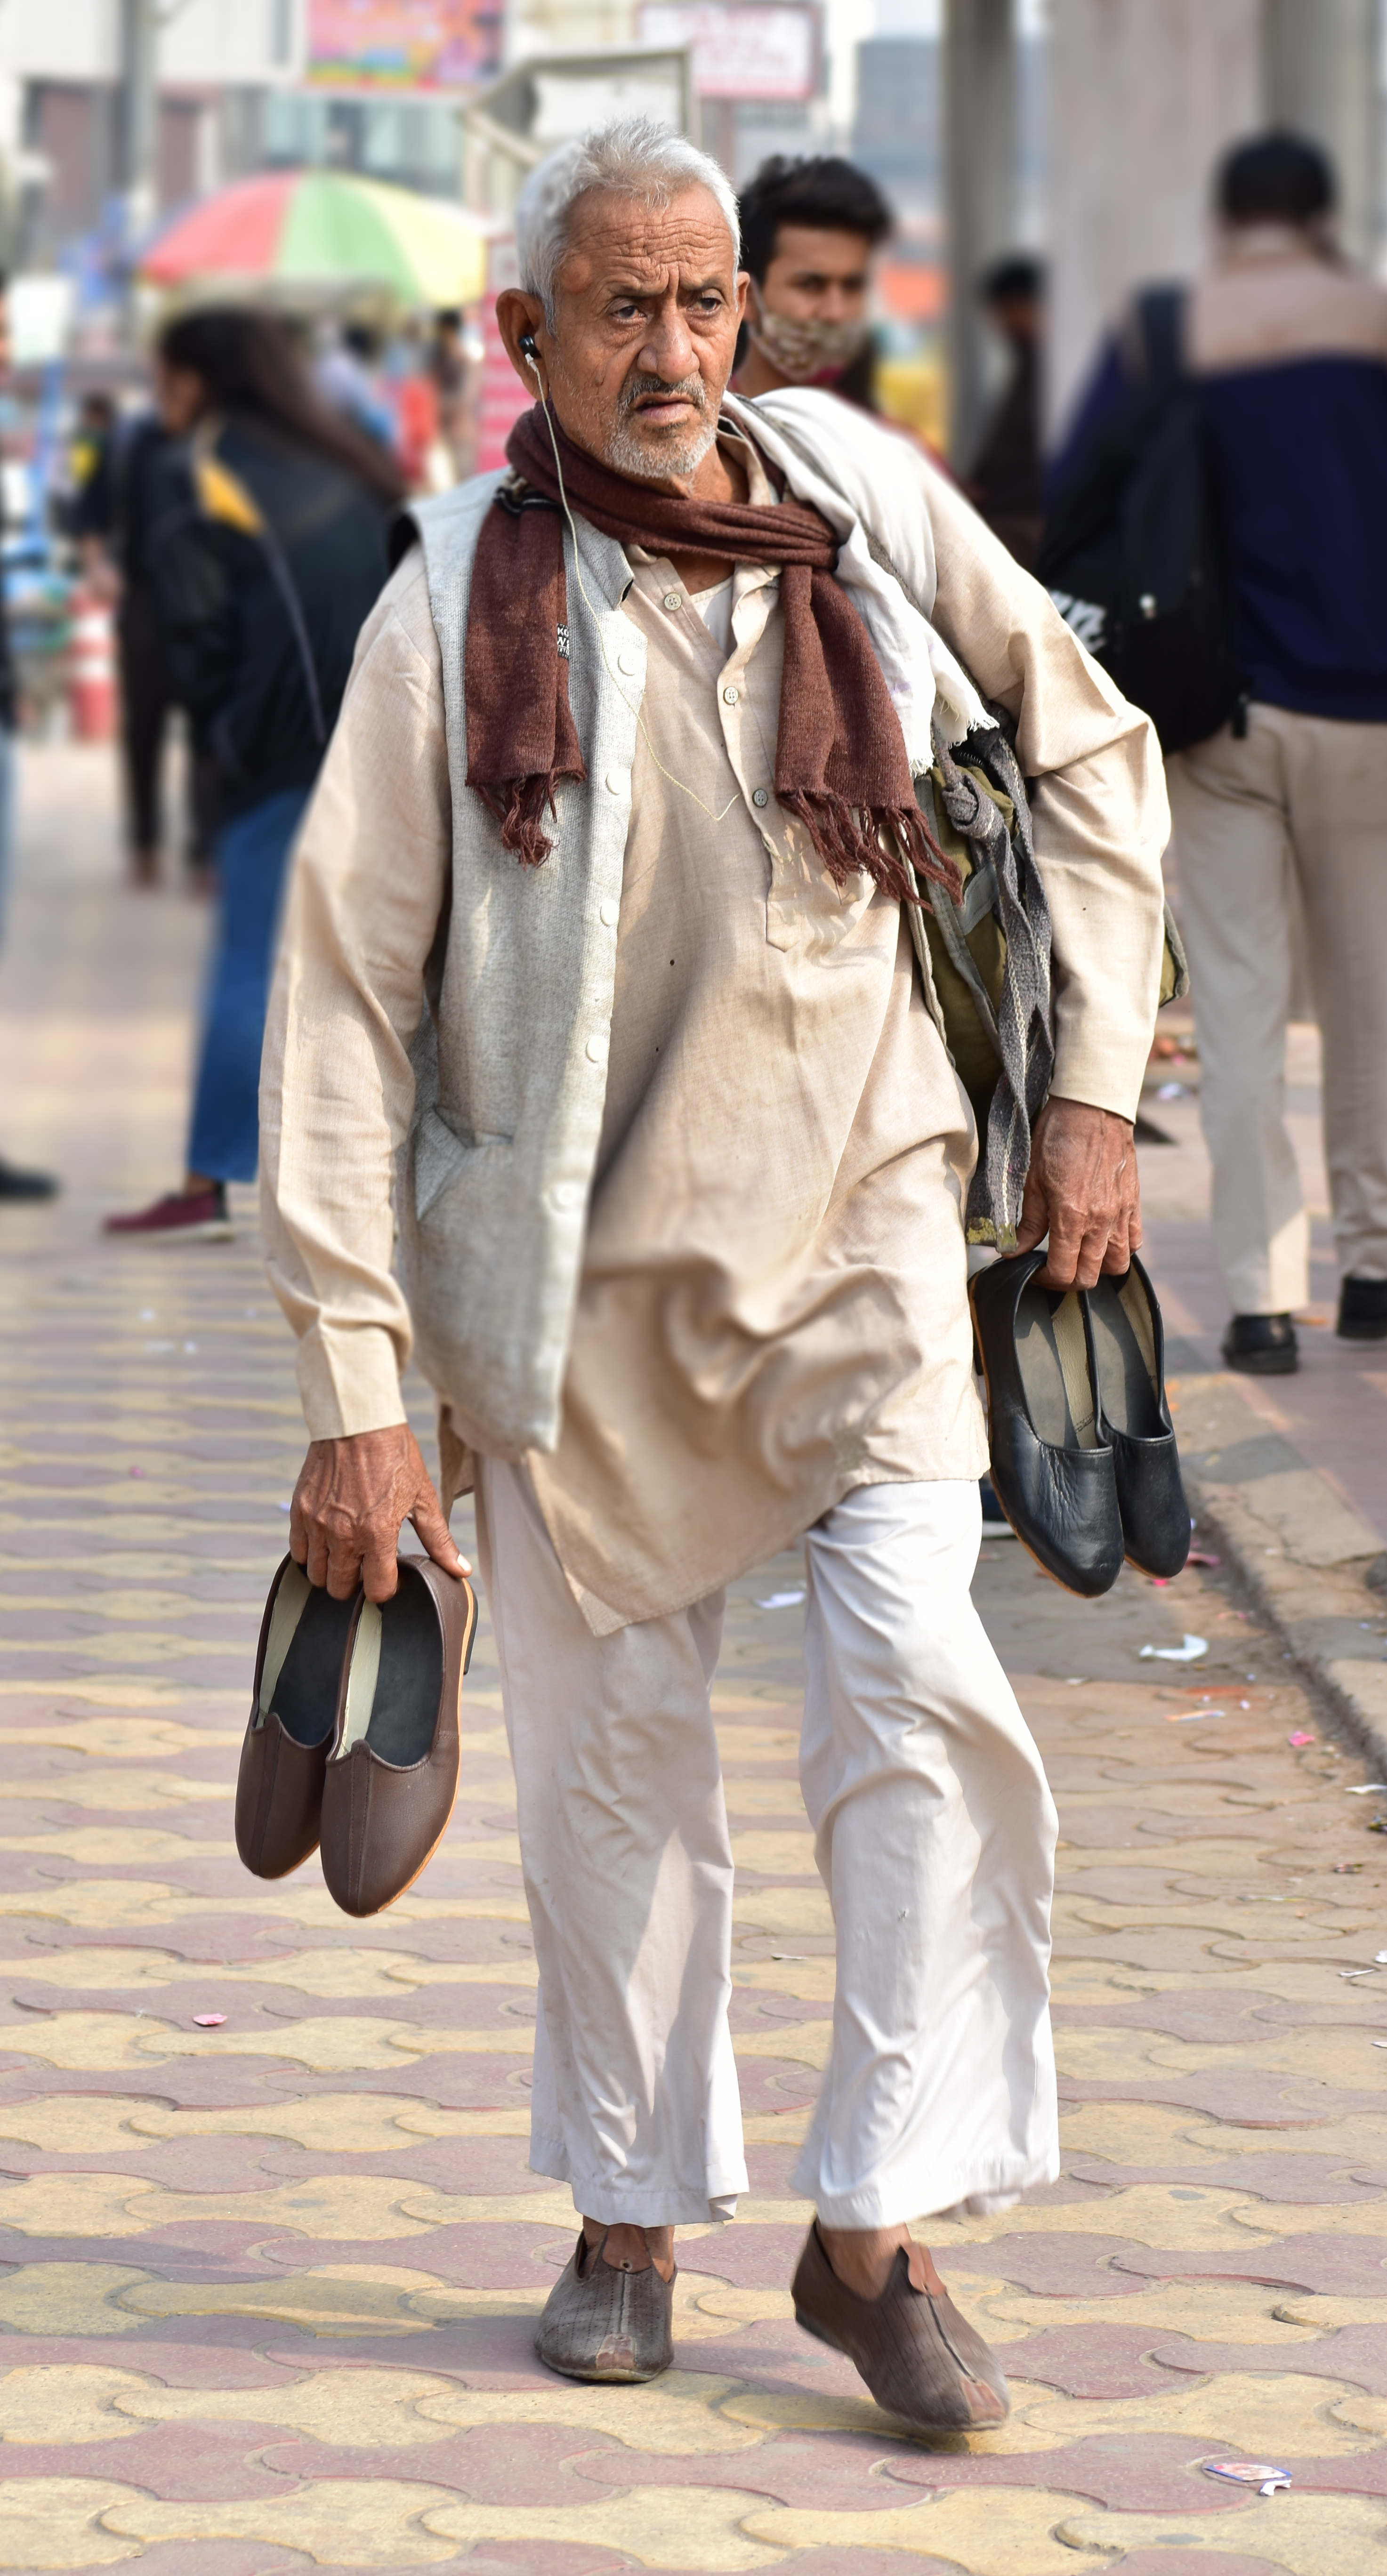 An Old guy selling leather shoes